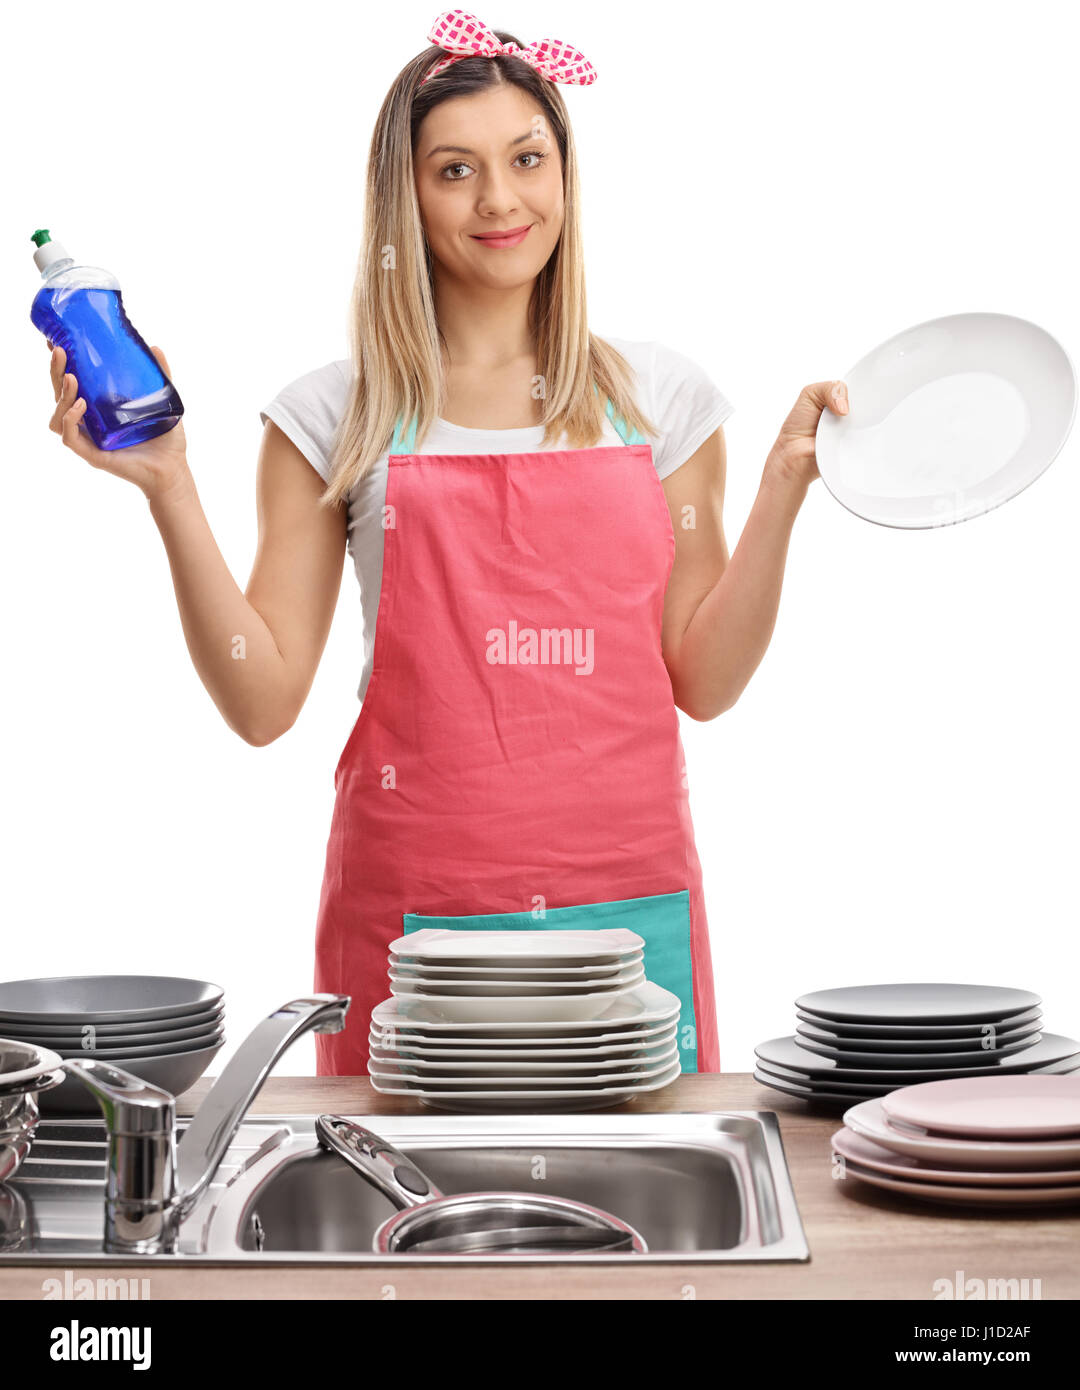 Young woman with an apron holding a detergent and a clean plate isolated on white background Stock Photo